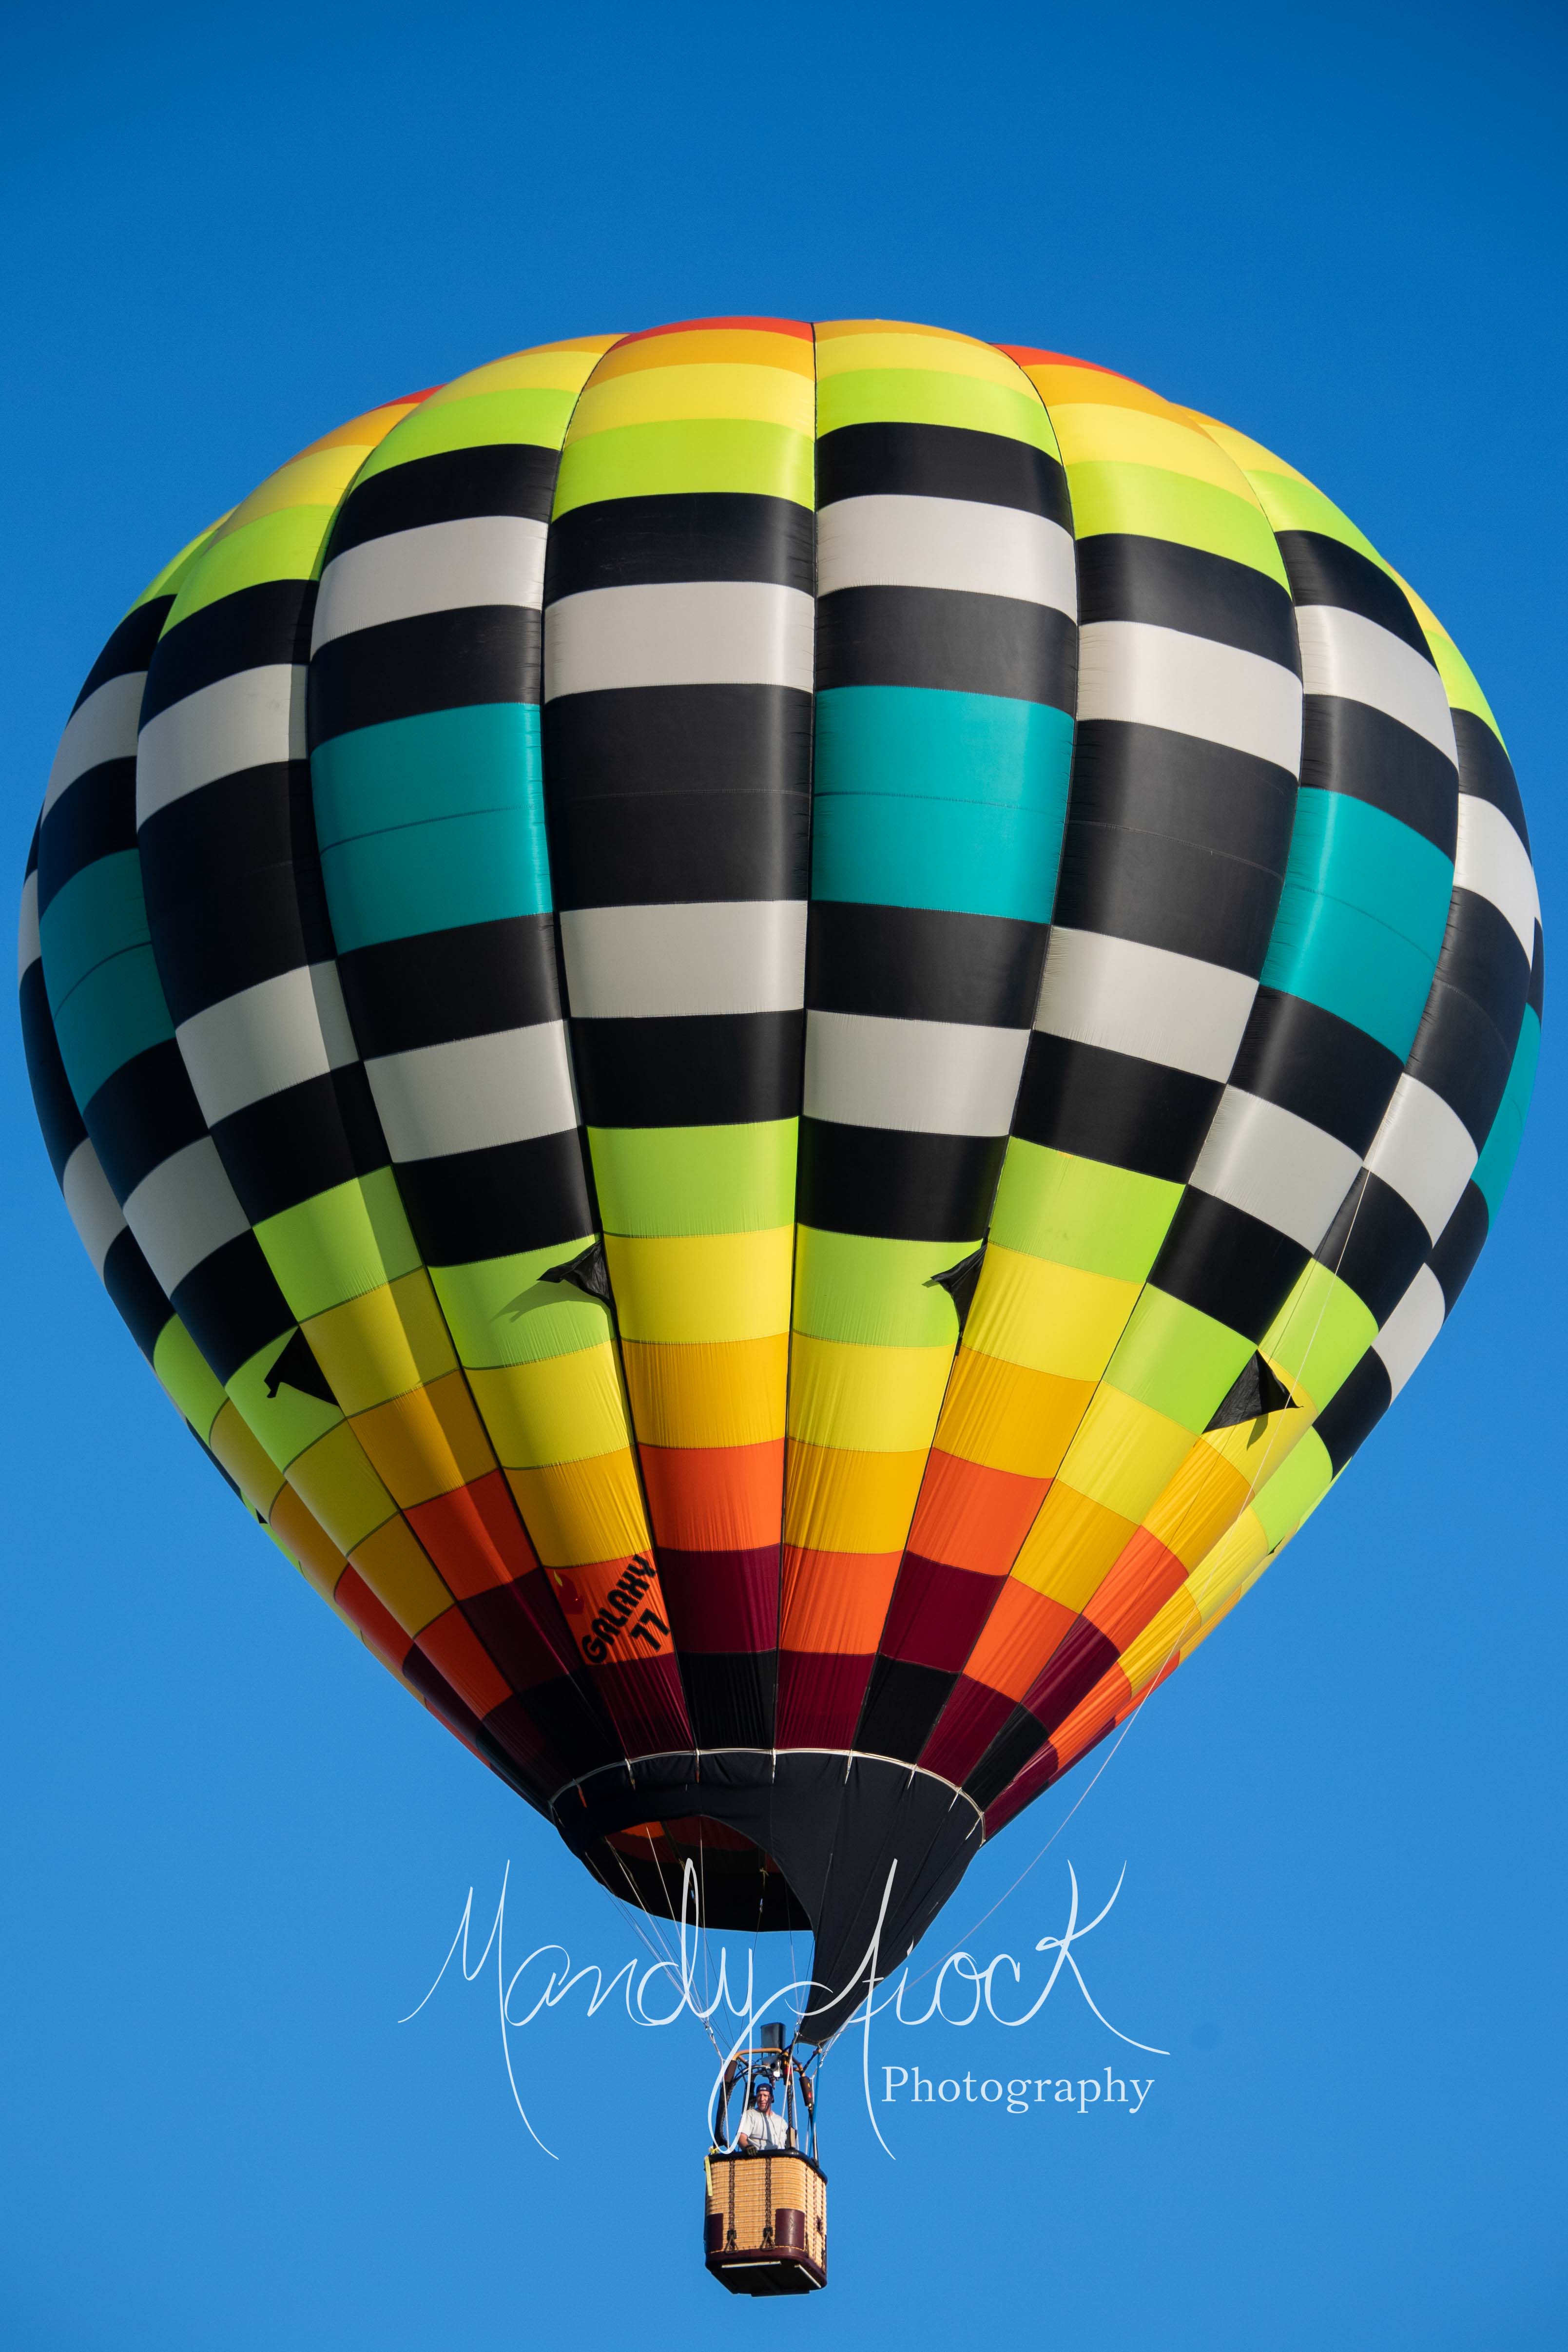 Photo’s from the 2019 Hopkins County Dairy Festival Hot Air Balloon Rally & Glow by Mandy Fiock Photography